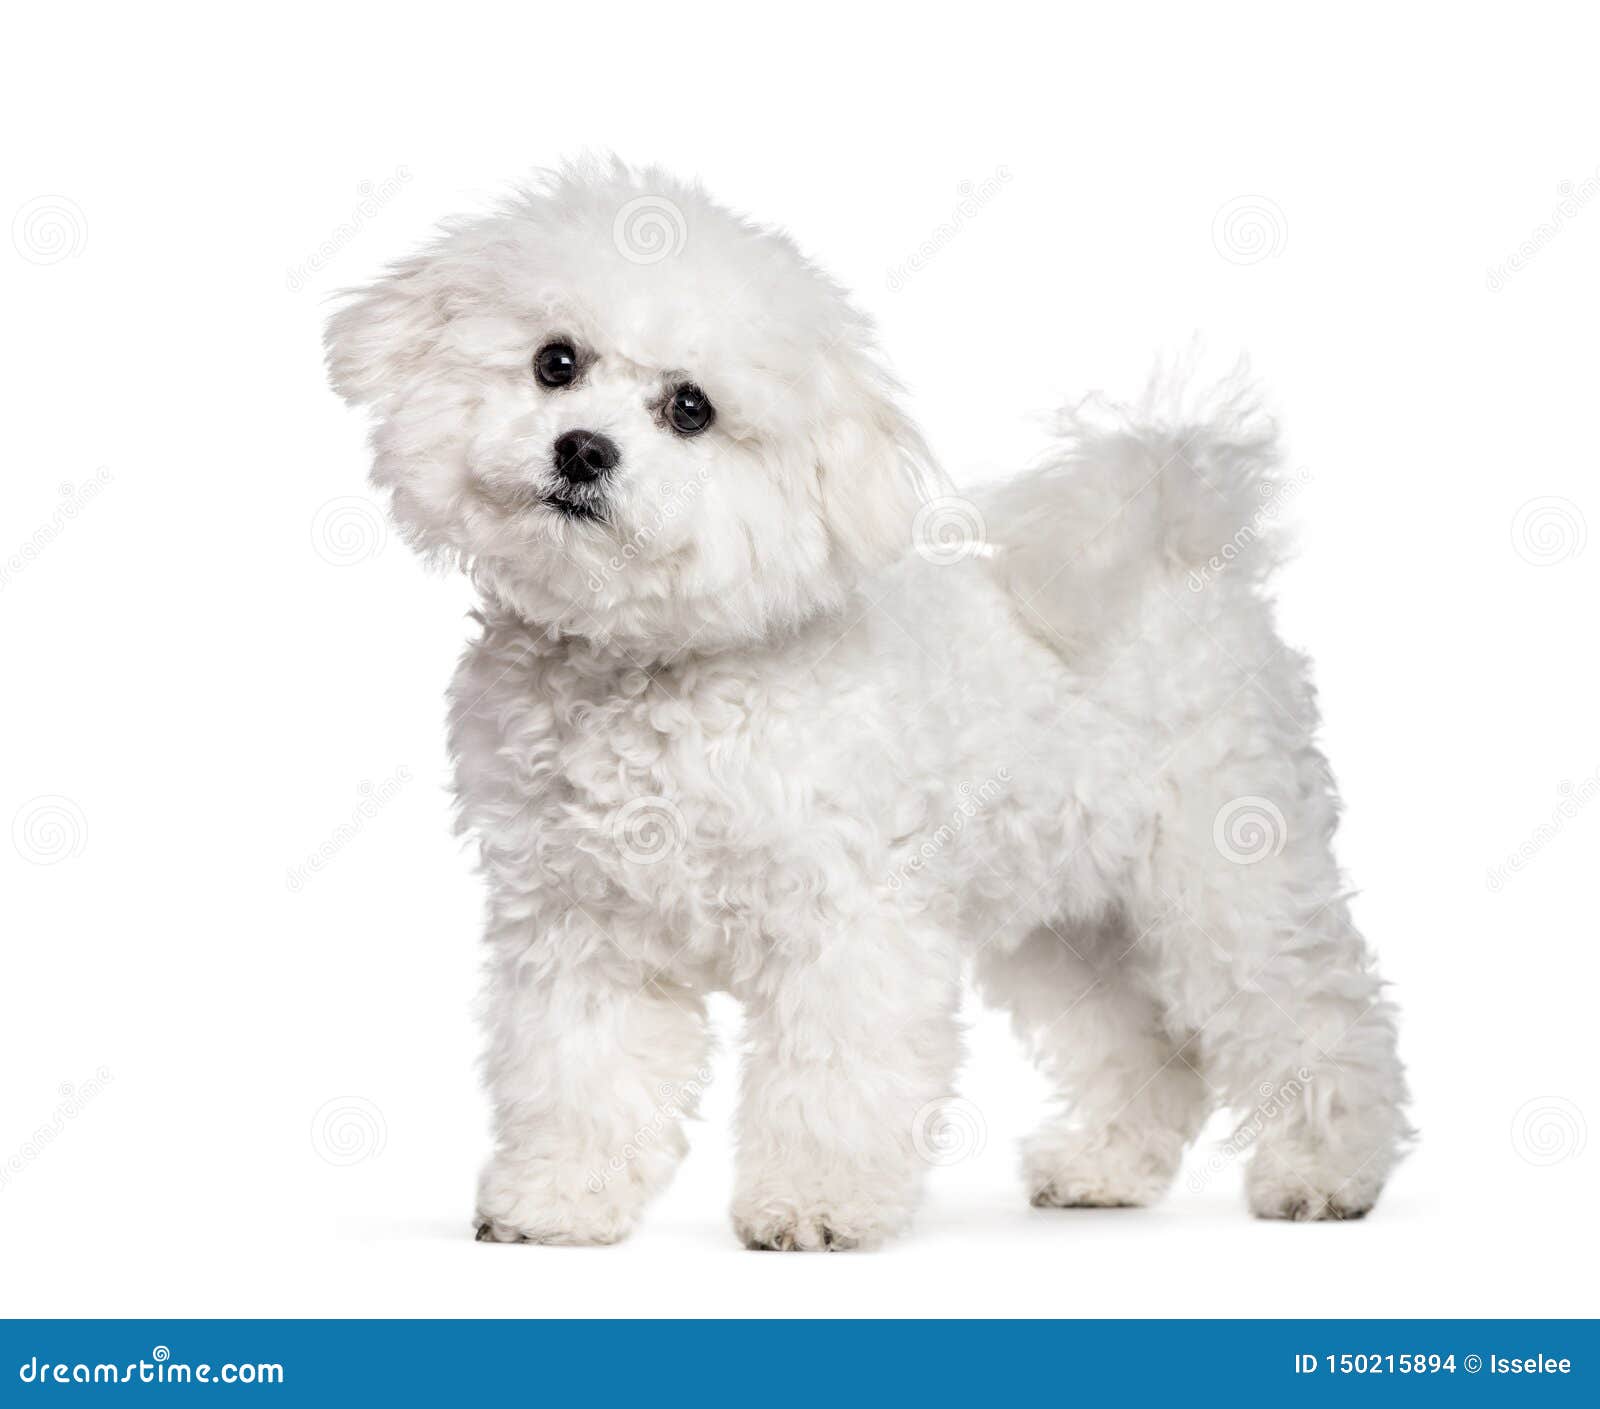 bichon frise standing against white background